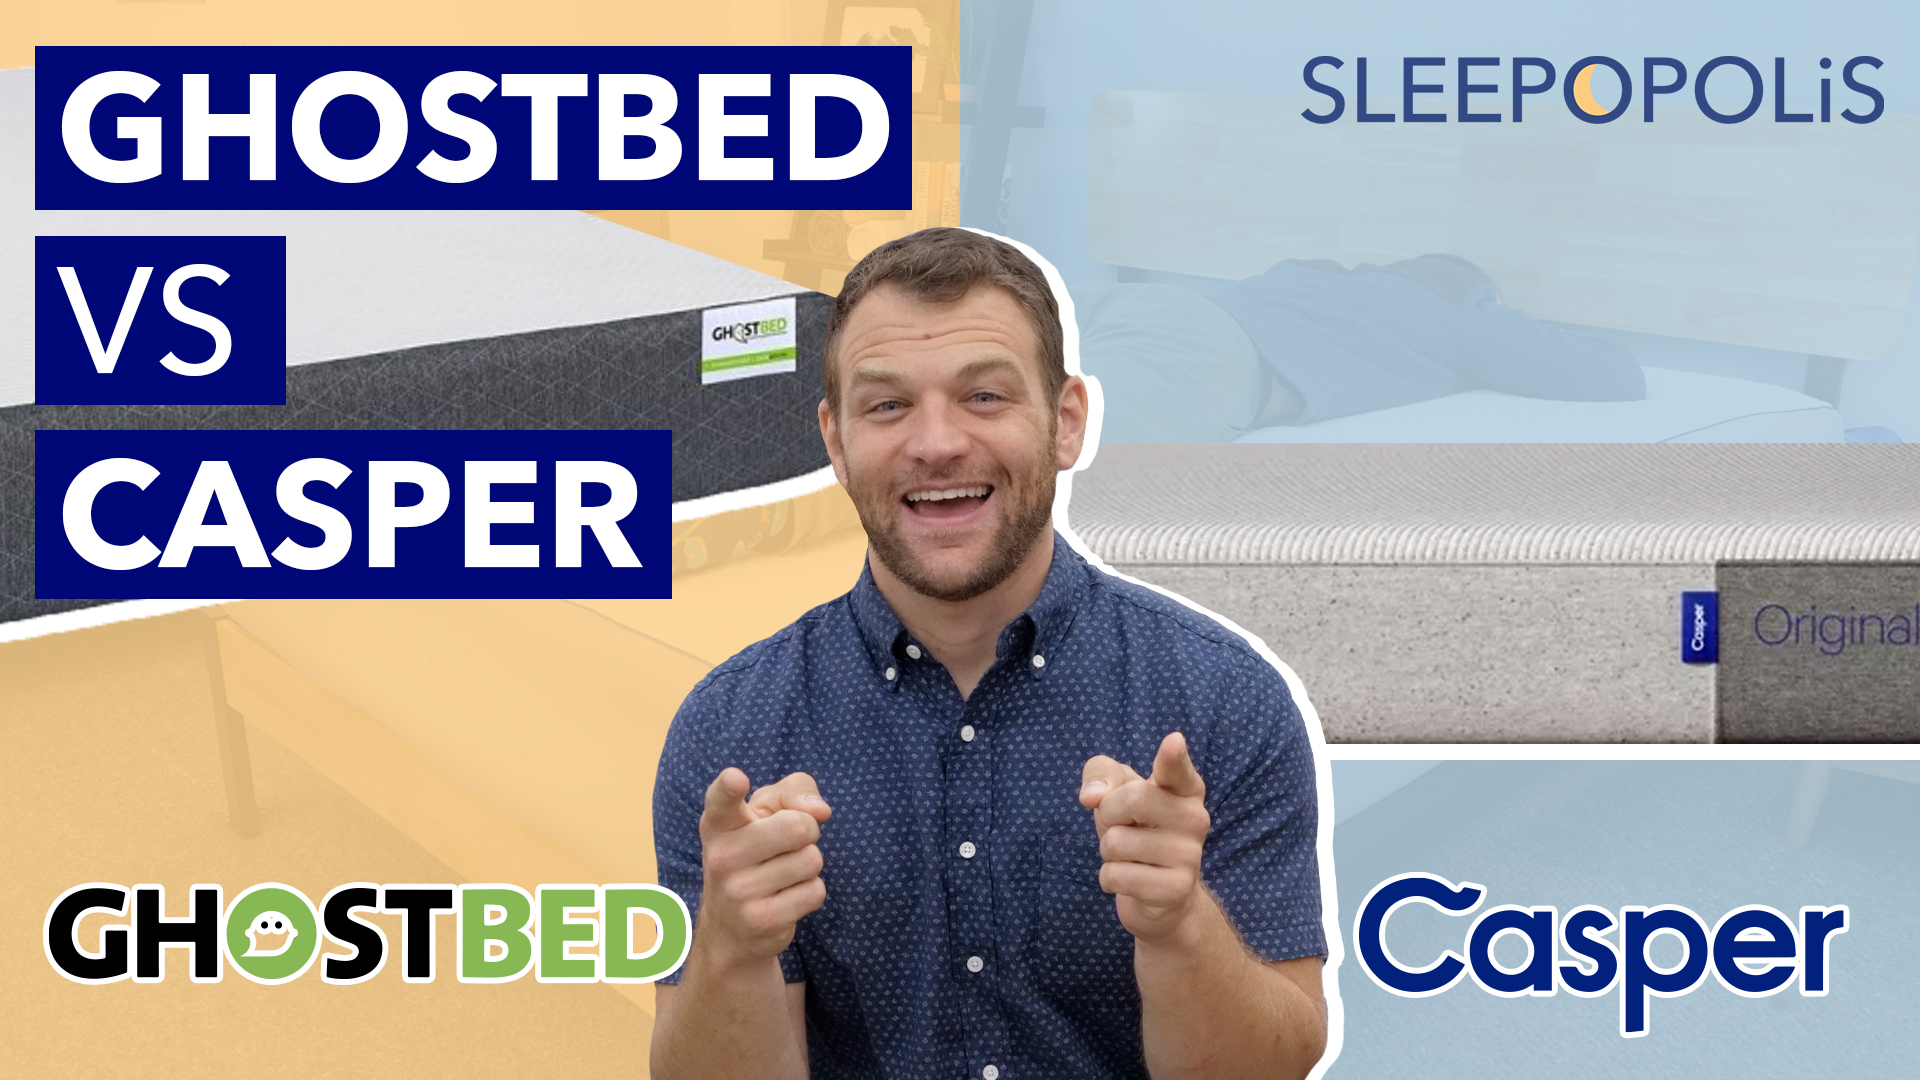 Come check out Sleepopolis's side-by-side Ghostbed vs Casper mattr...